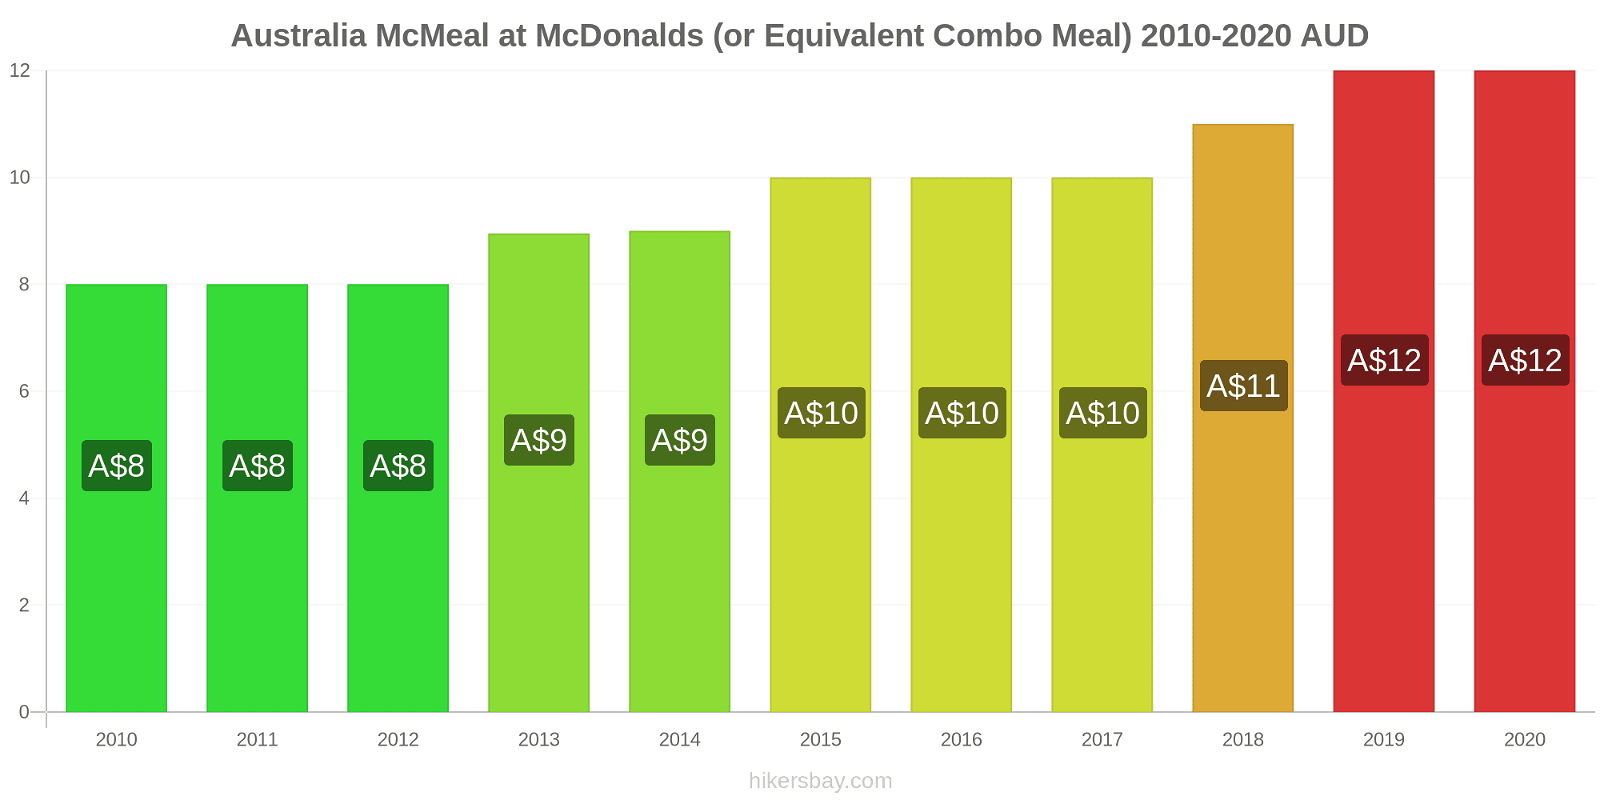 Australia price changes McMeal at McDonalds (or Equivalent Combo Meal) hikersbay.com